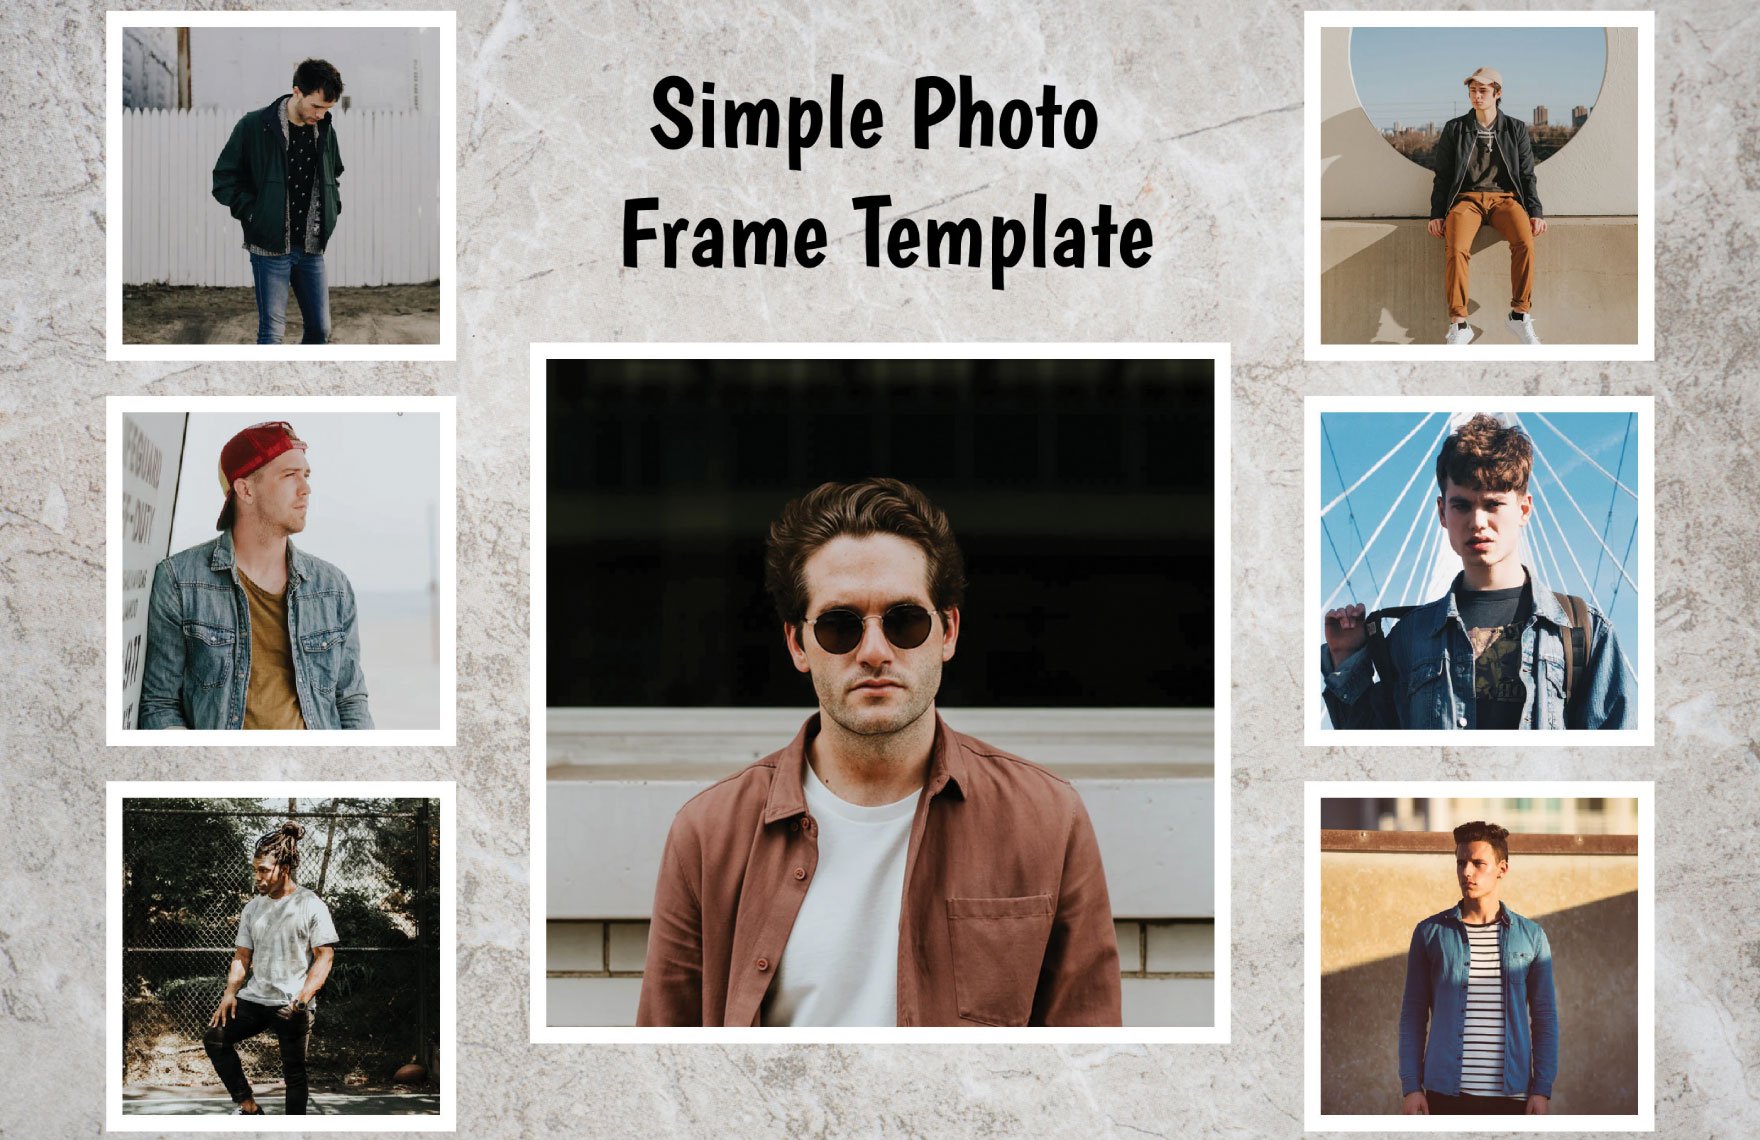 Simple Photo Frame Template